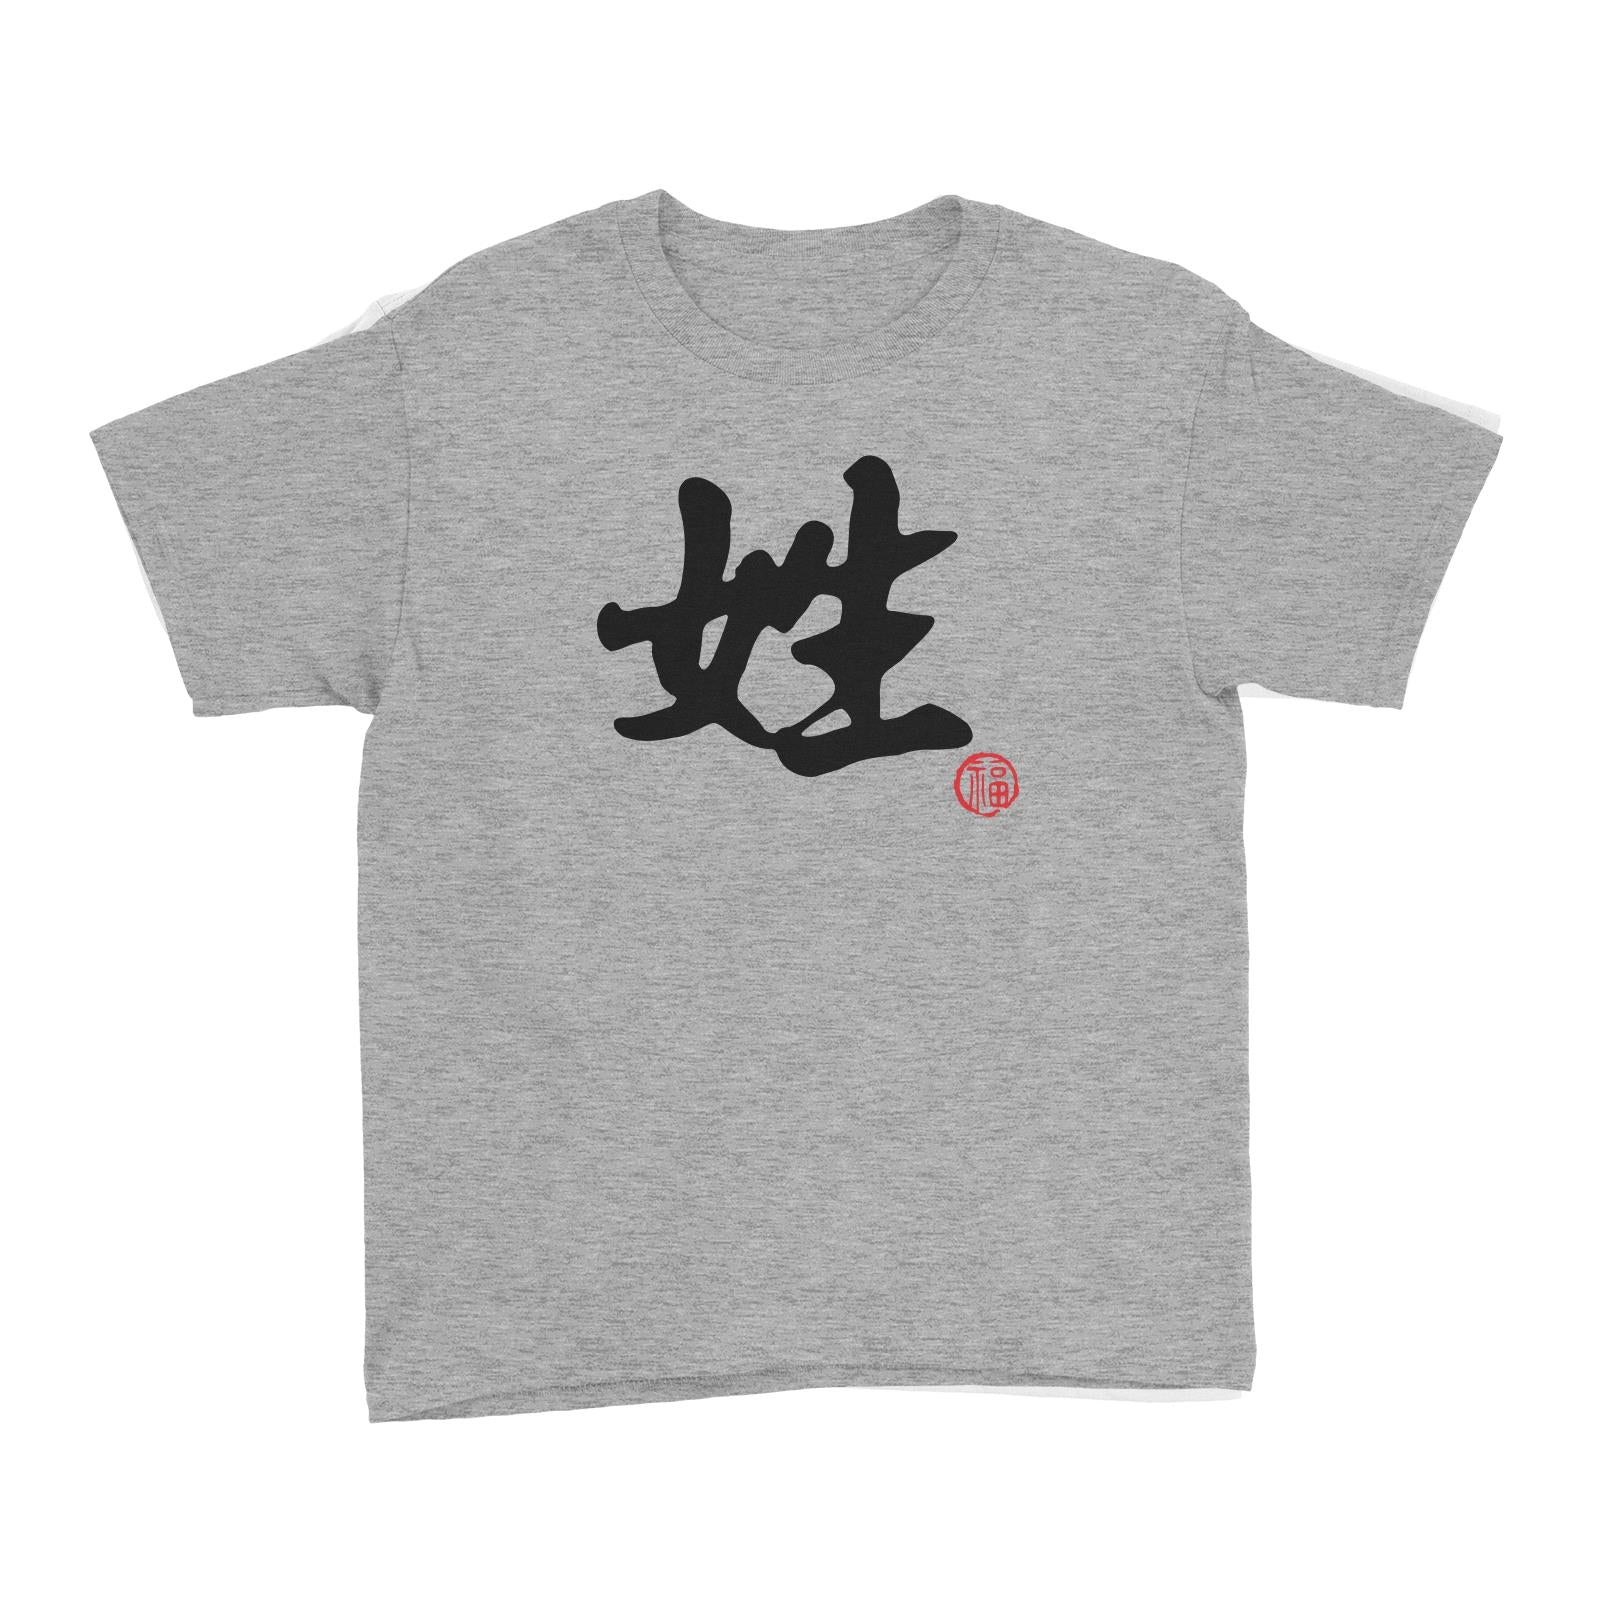 Chinese Surname B&W with Prosperity Seal Kid's T-Shirt Matching Family Personalizable Designs